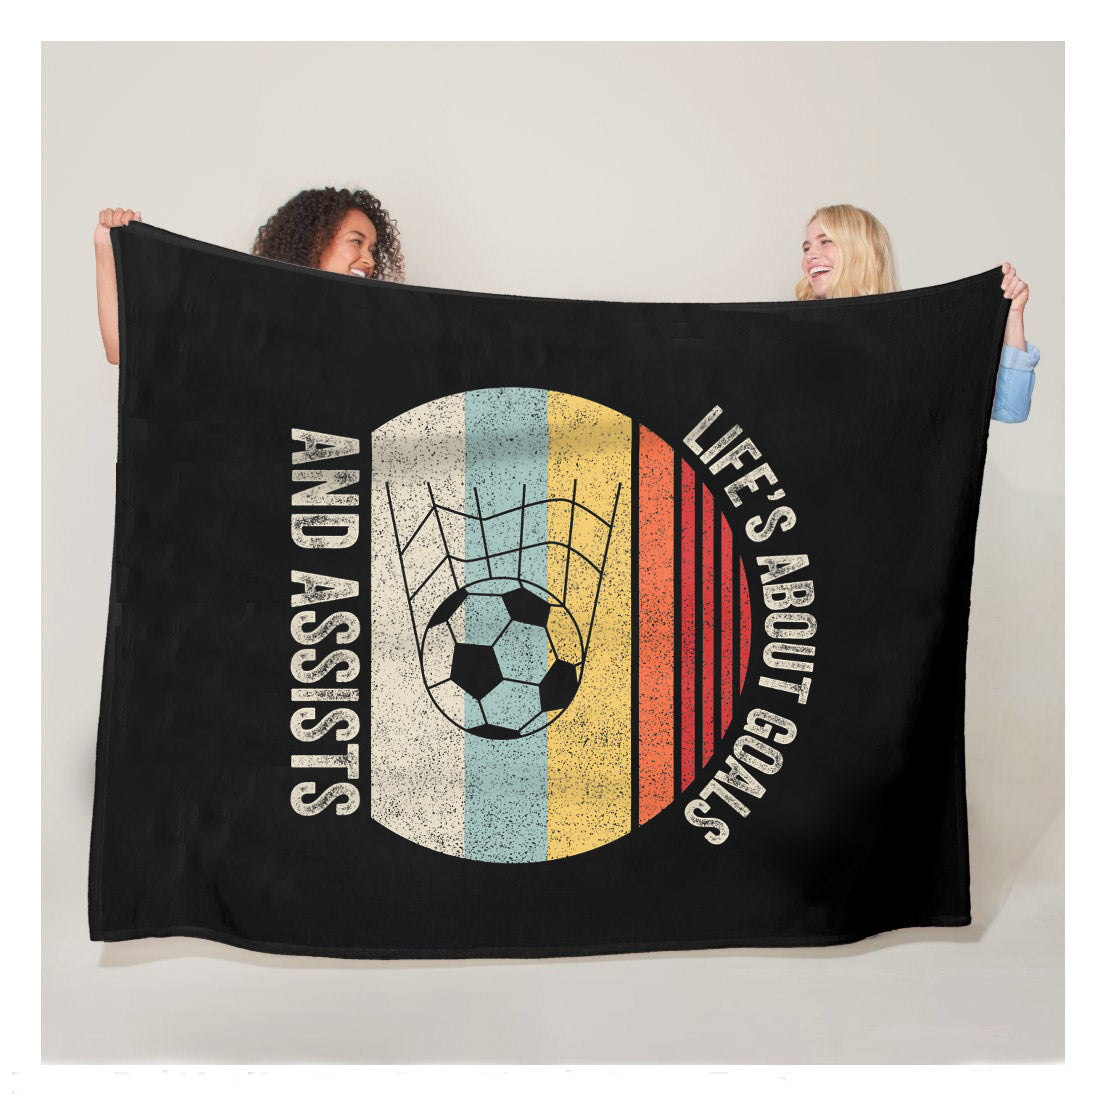 Soccer Players Lifes About Goals And Assists Love Soccer Fleece Blanket,  Soccer Outdoor Blankets, Soccer Gifts For Coach And Soccer Players, Birthday Gift For Soccer Player